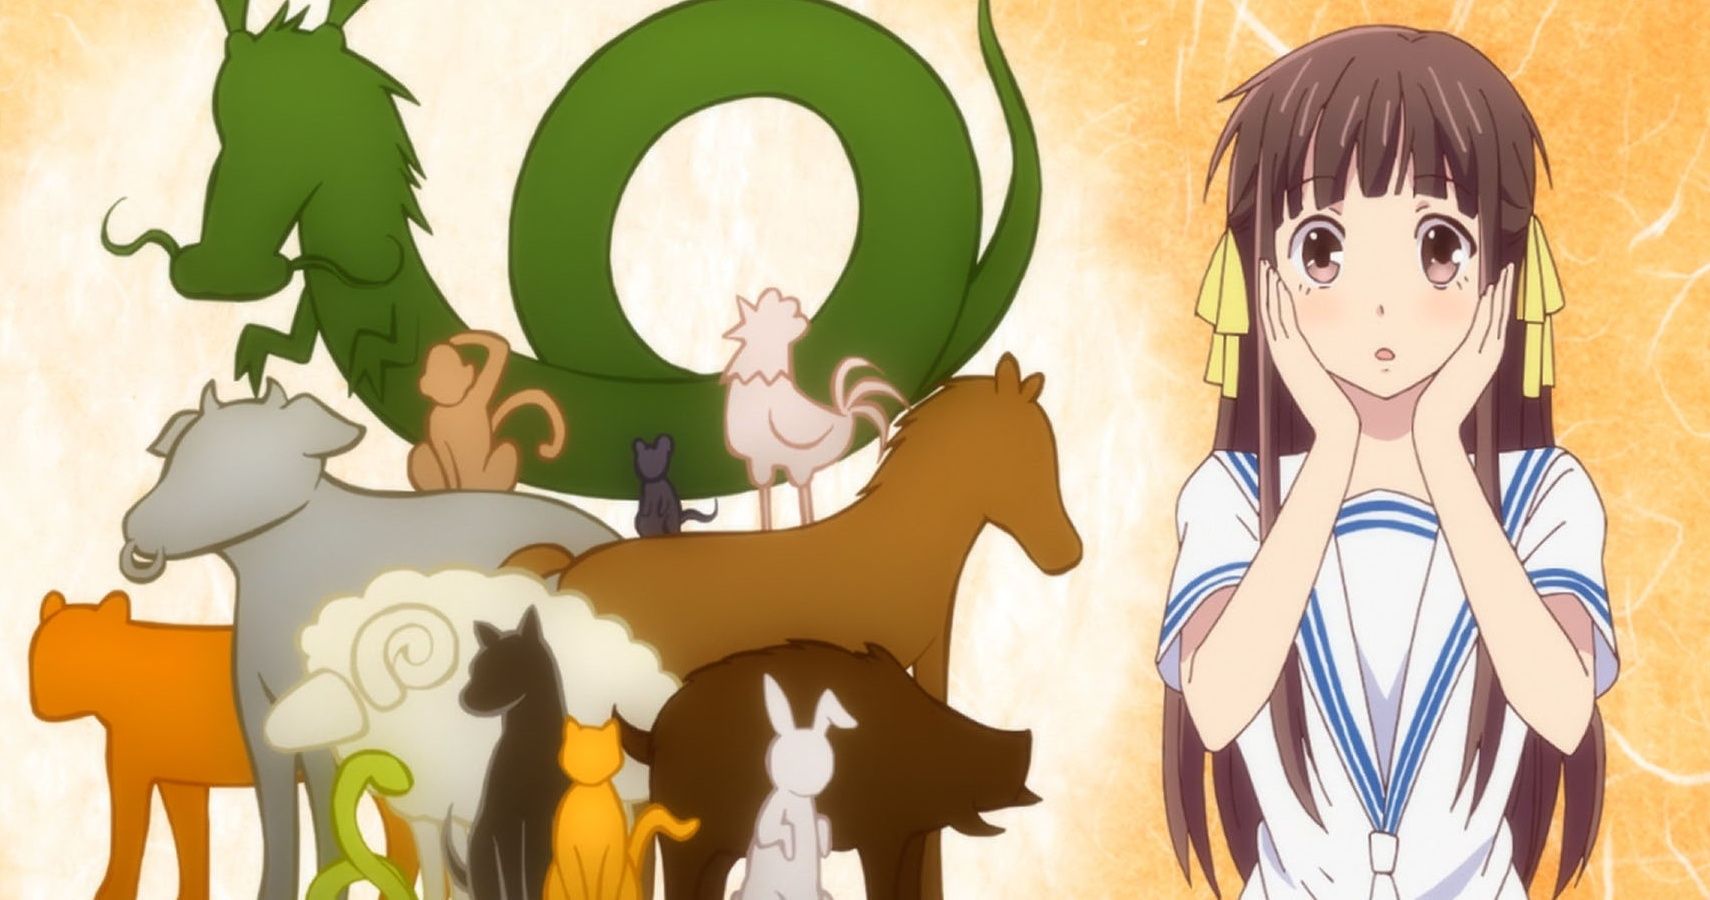 Which Fruits Basket Character Are You Based On Your Zodiac Sign?